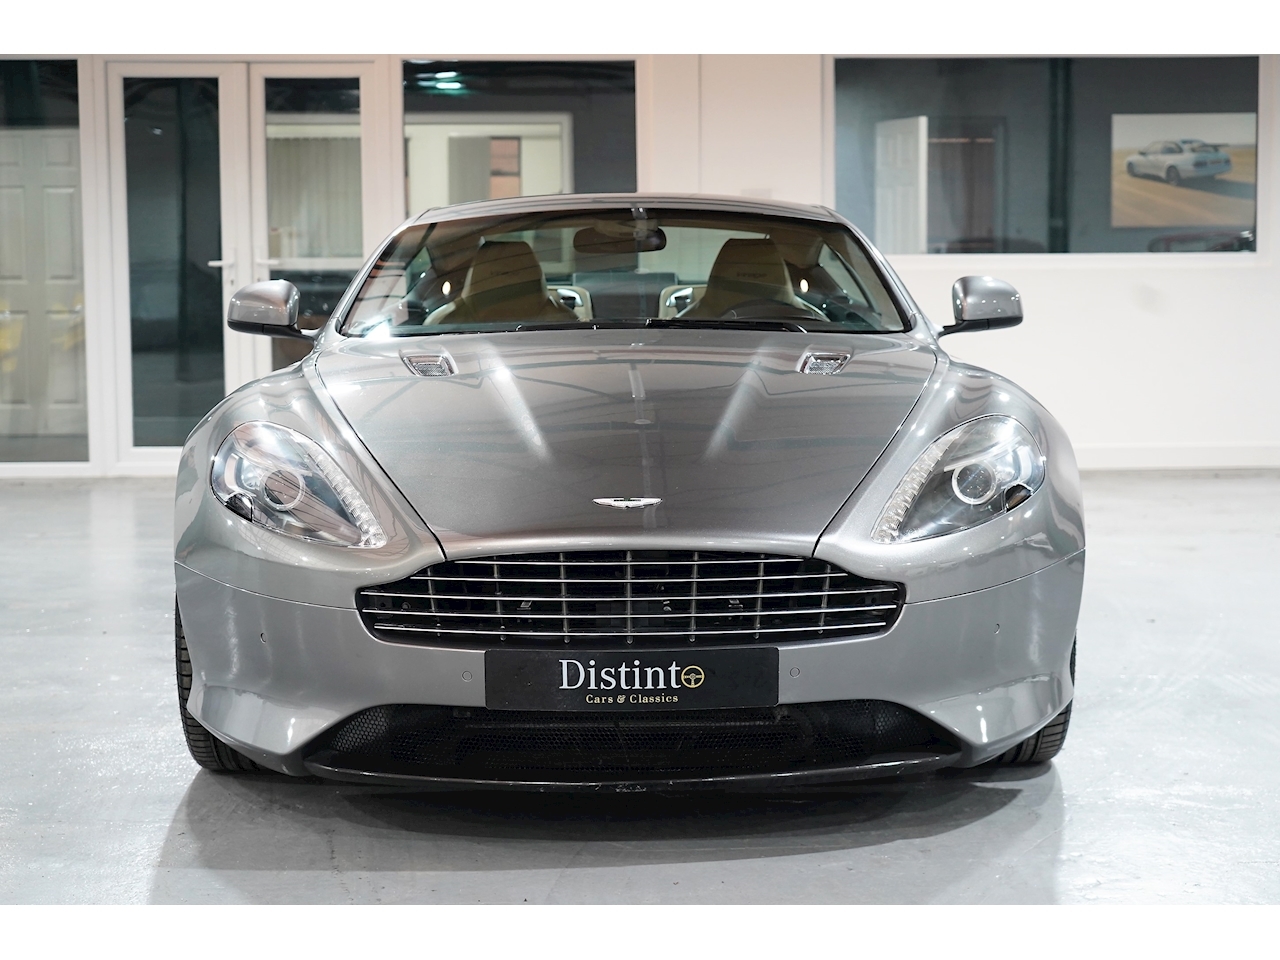 2012 Aston Martin Virage 6.0 V12 Coupe - Tungsten Silver - Left Hand Drive (LHD)